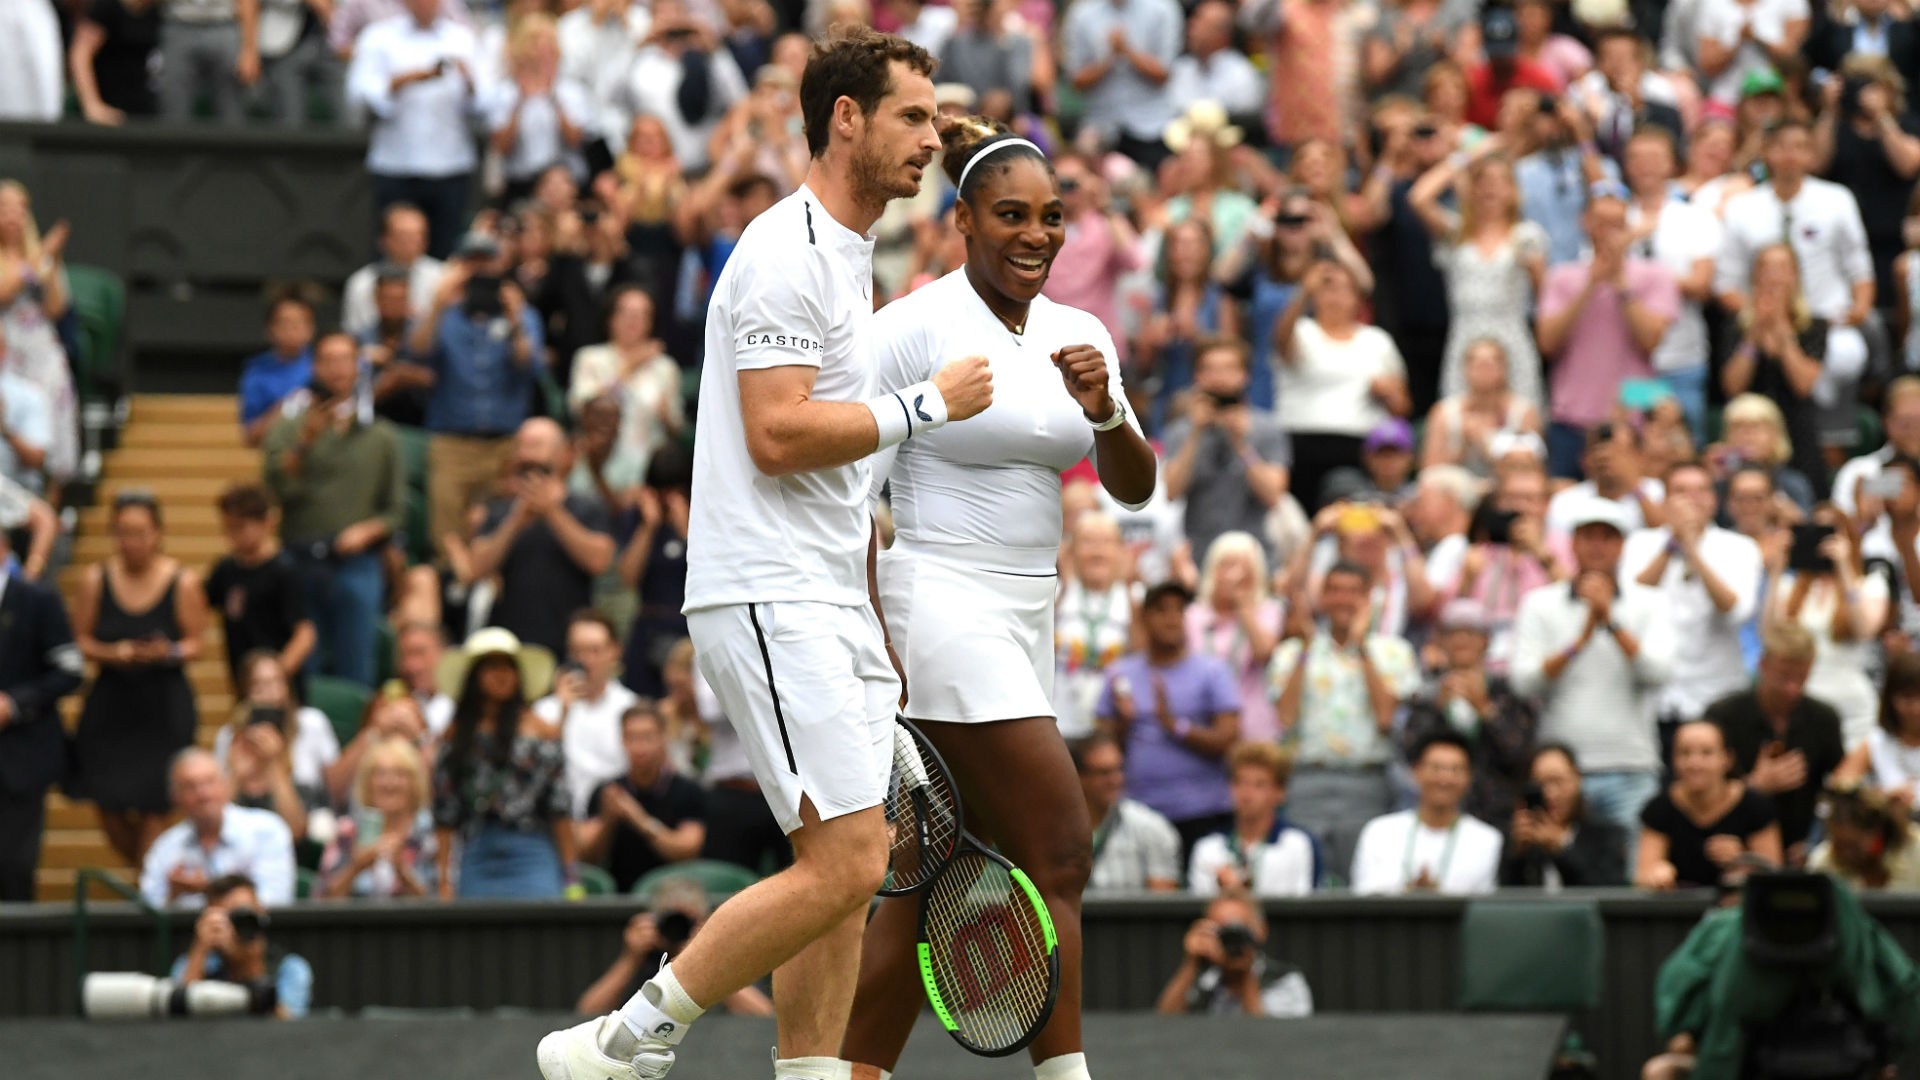 Serena Williams is stamping her authority on Wimbledon this year, as Andy Murray and Alison Riske discovered in Tuesday's action.